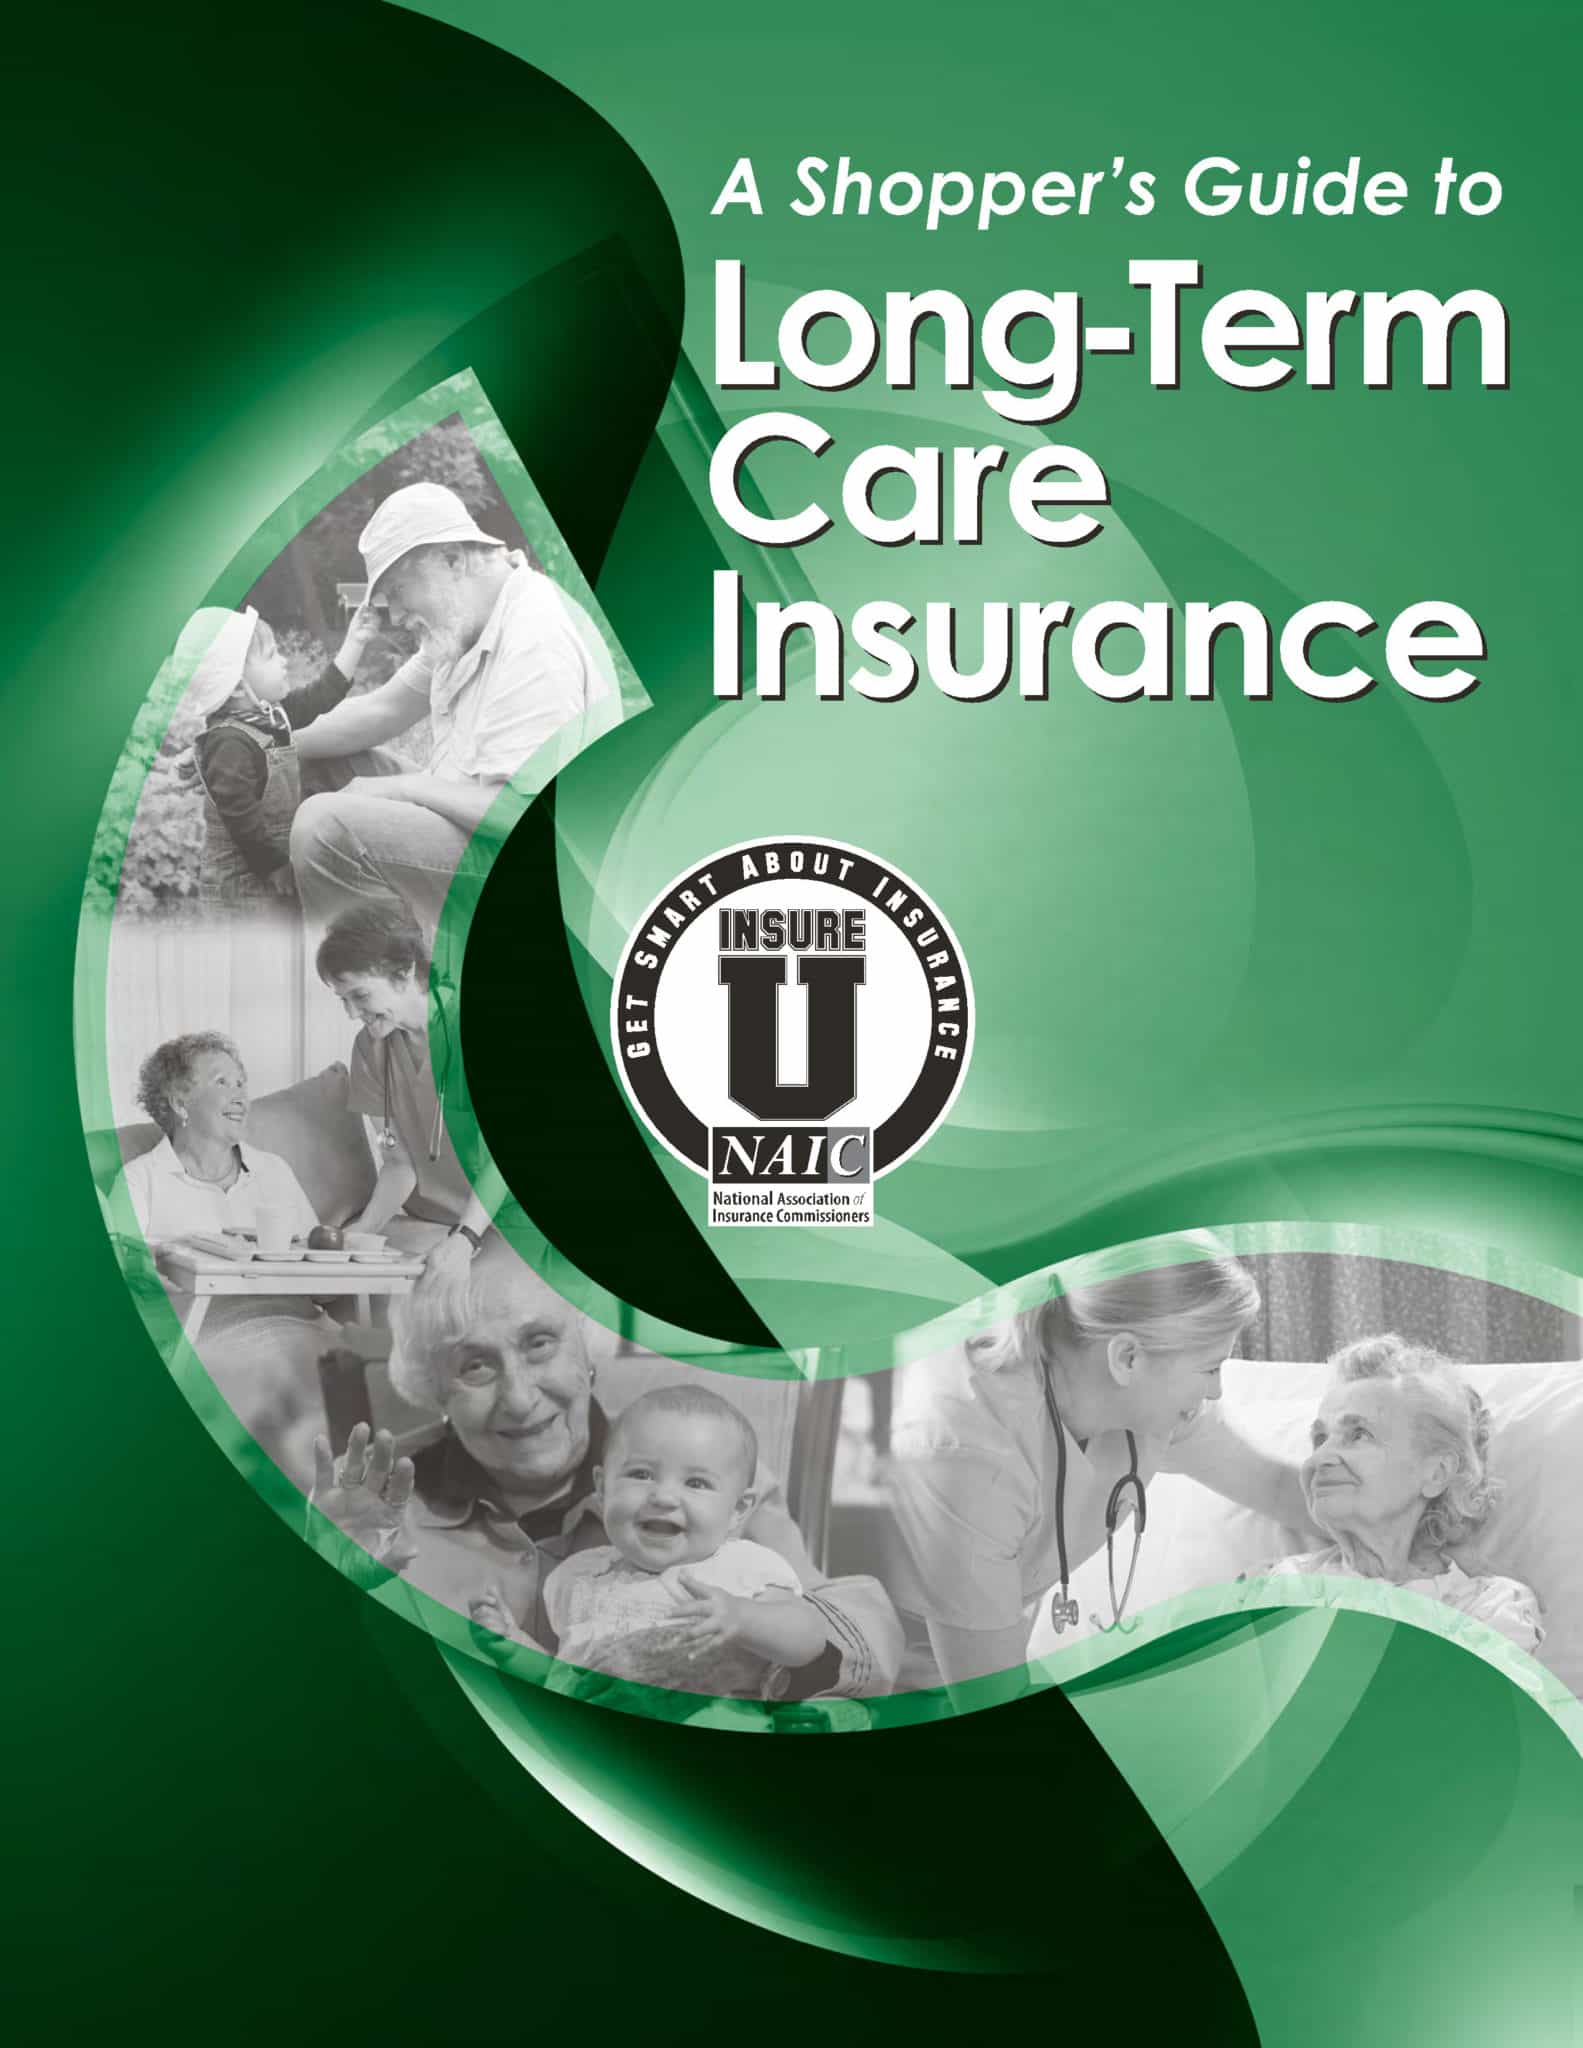 A Shopper's Guide to Long-Term Care Insurance